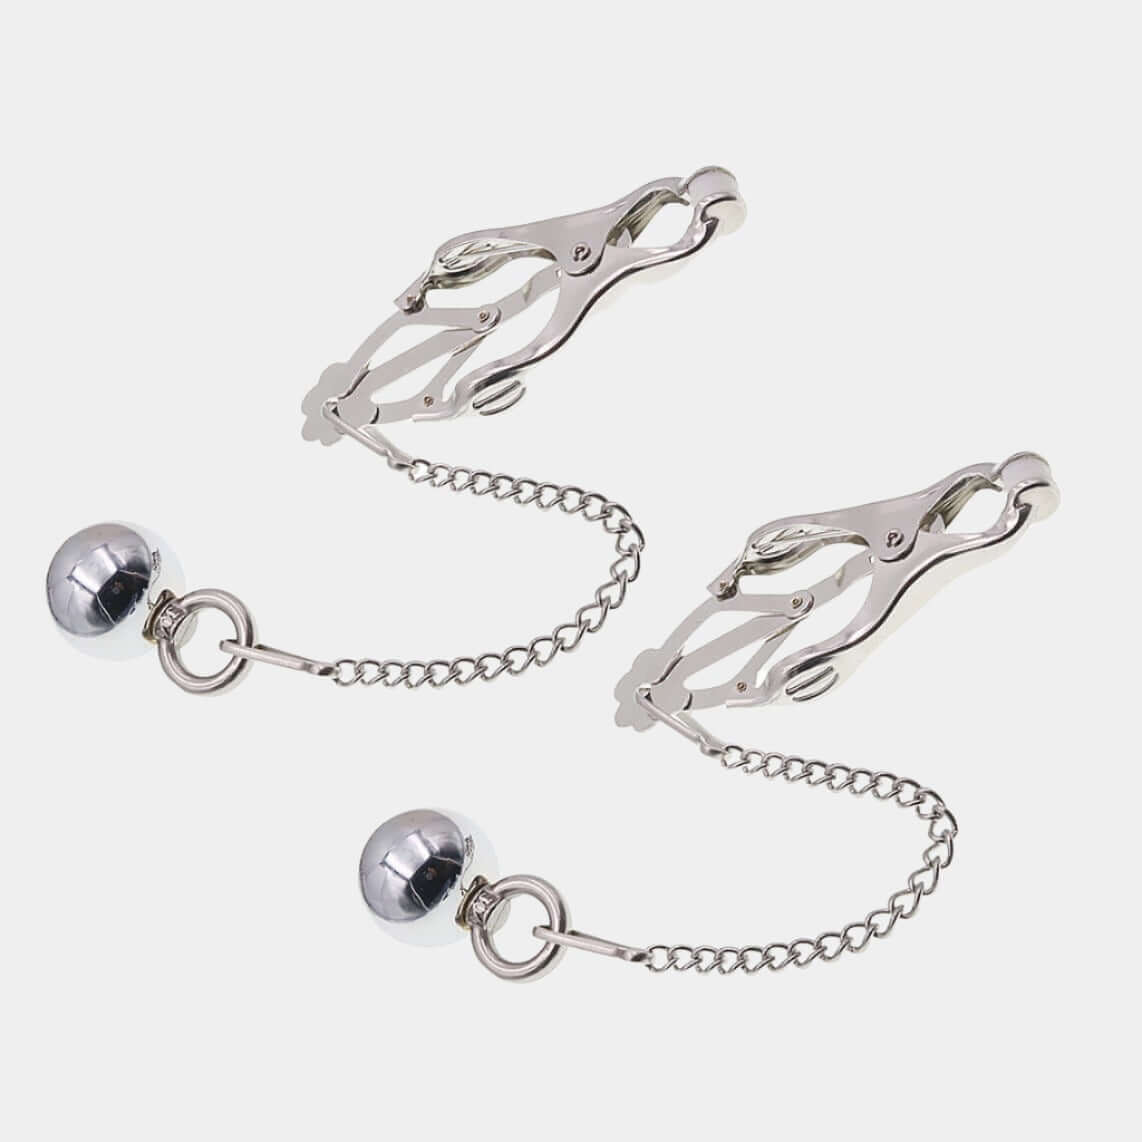 Cantilever Clamps with Ball Weight on Chain